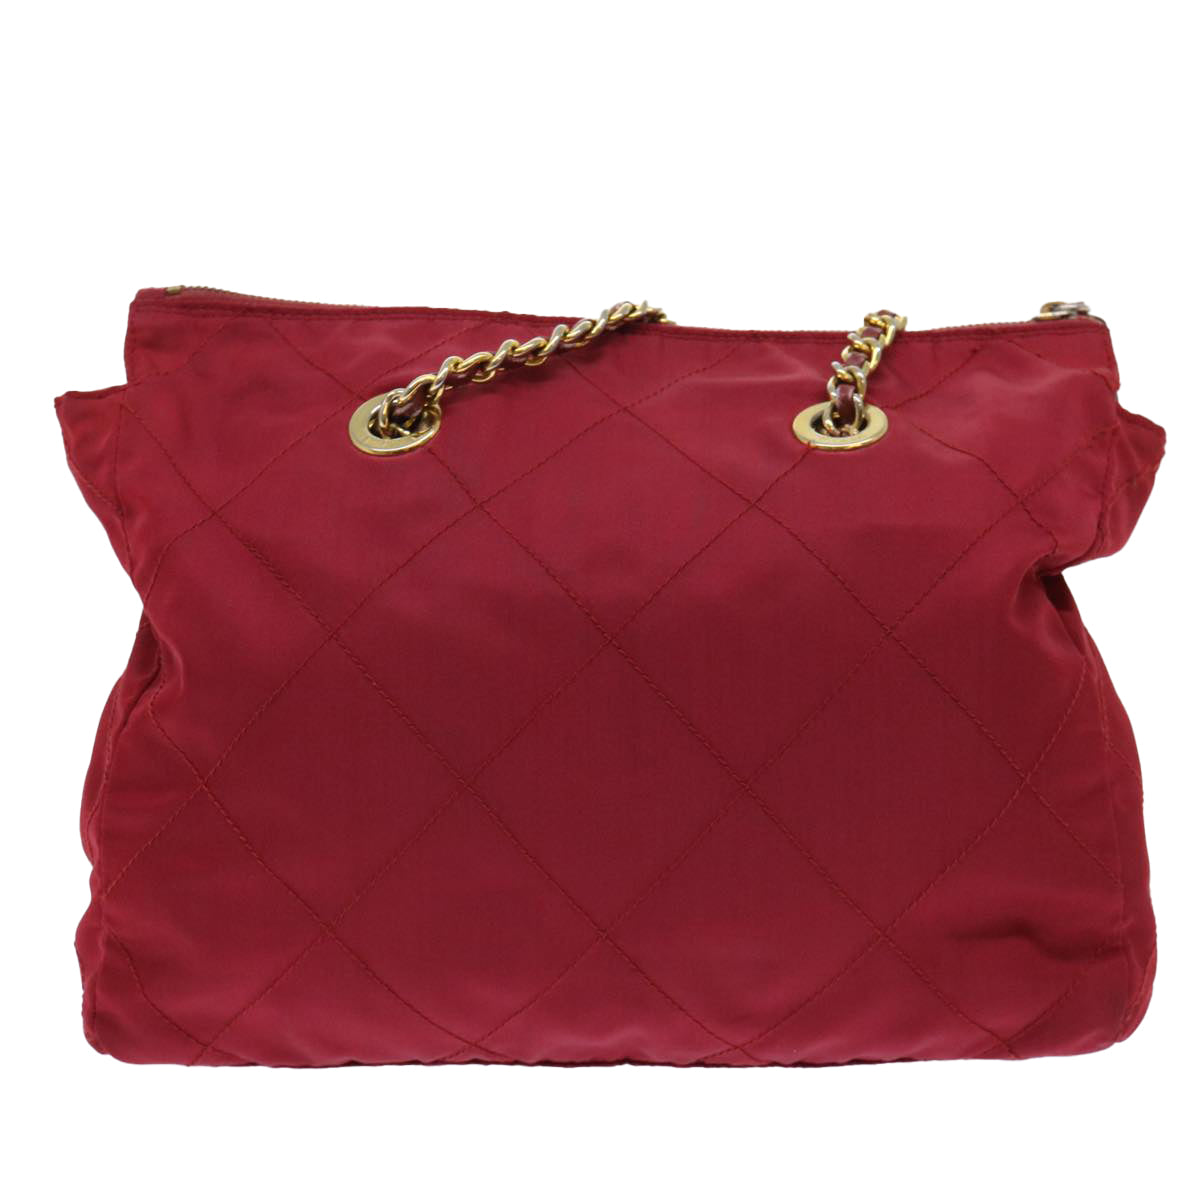 PRADA Quilted Chain Shoulder Bag Nylon Red Auth am4969